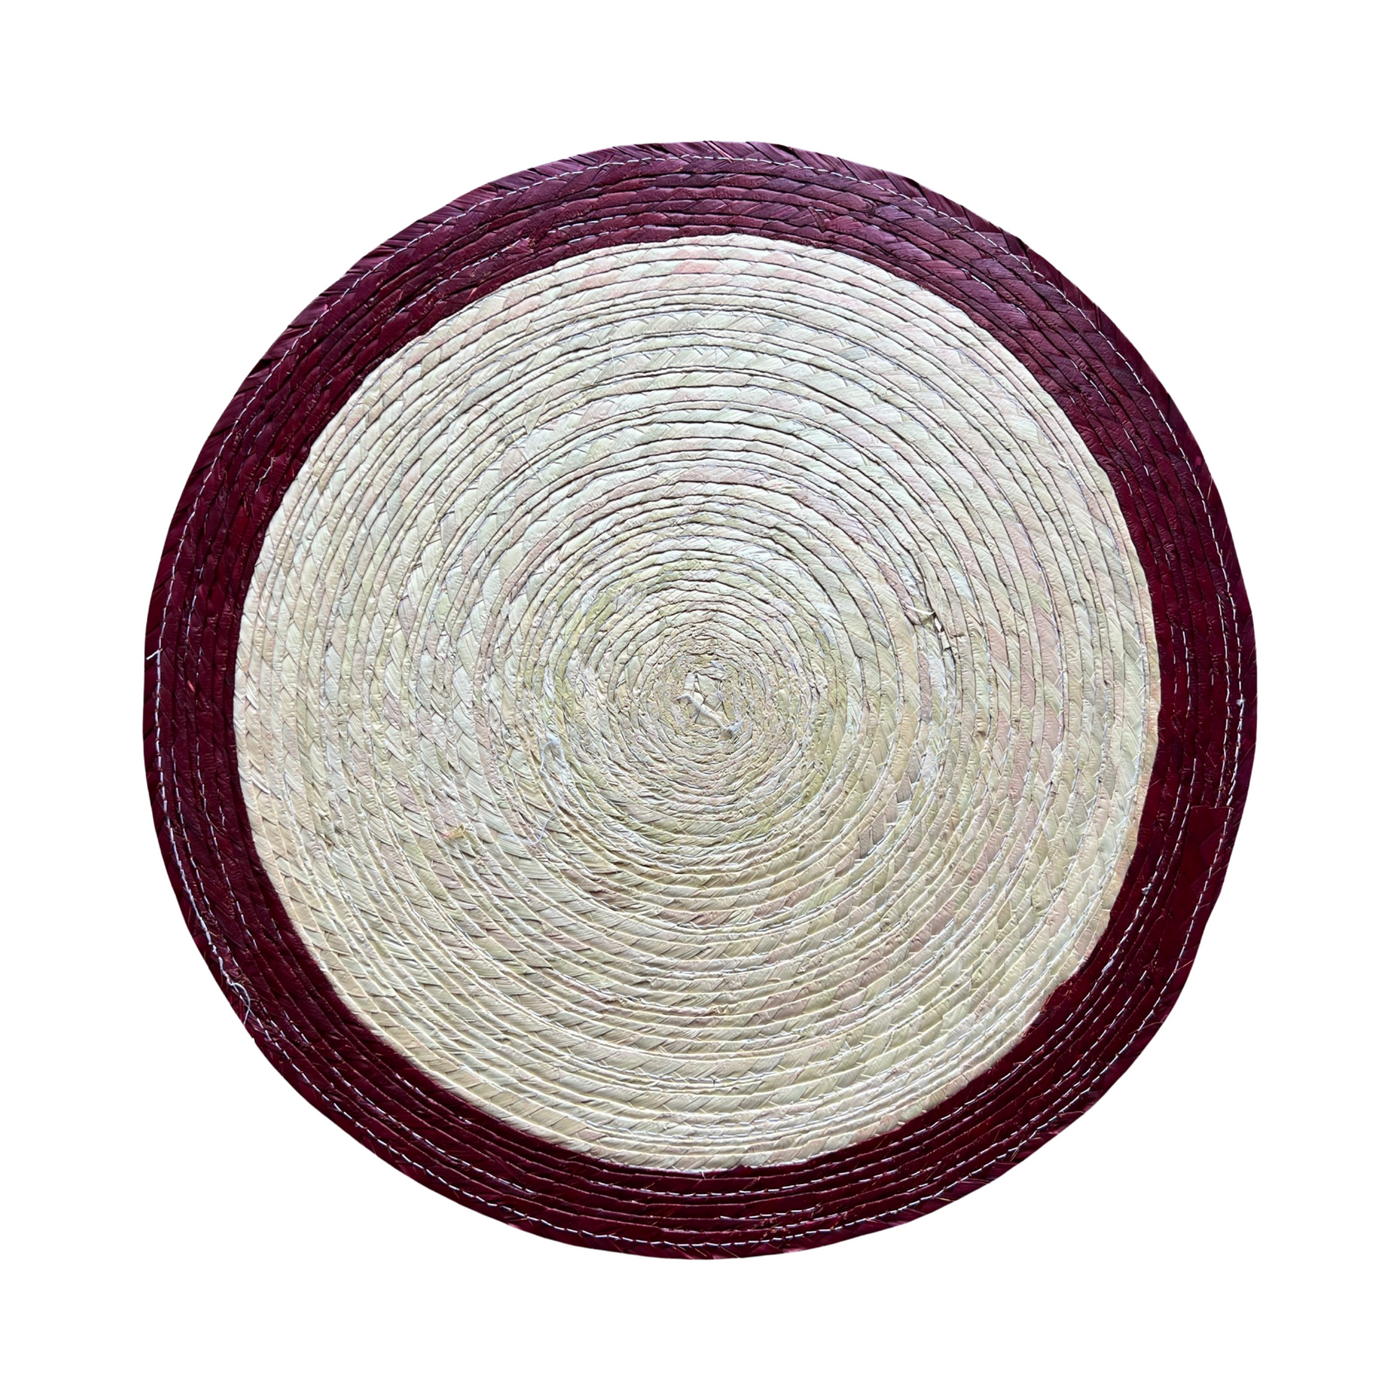 Round natural colored palm placemat with an maroon border